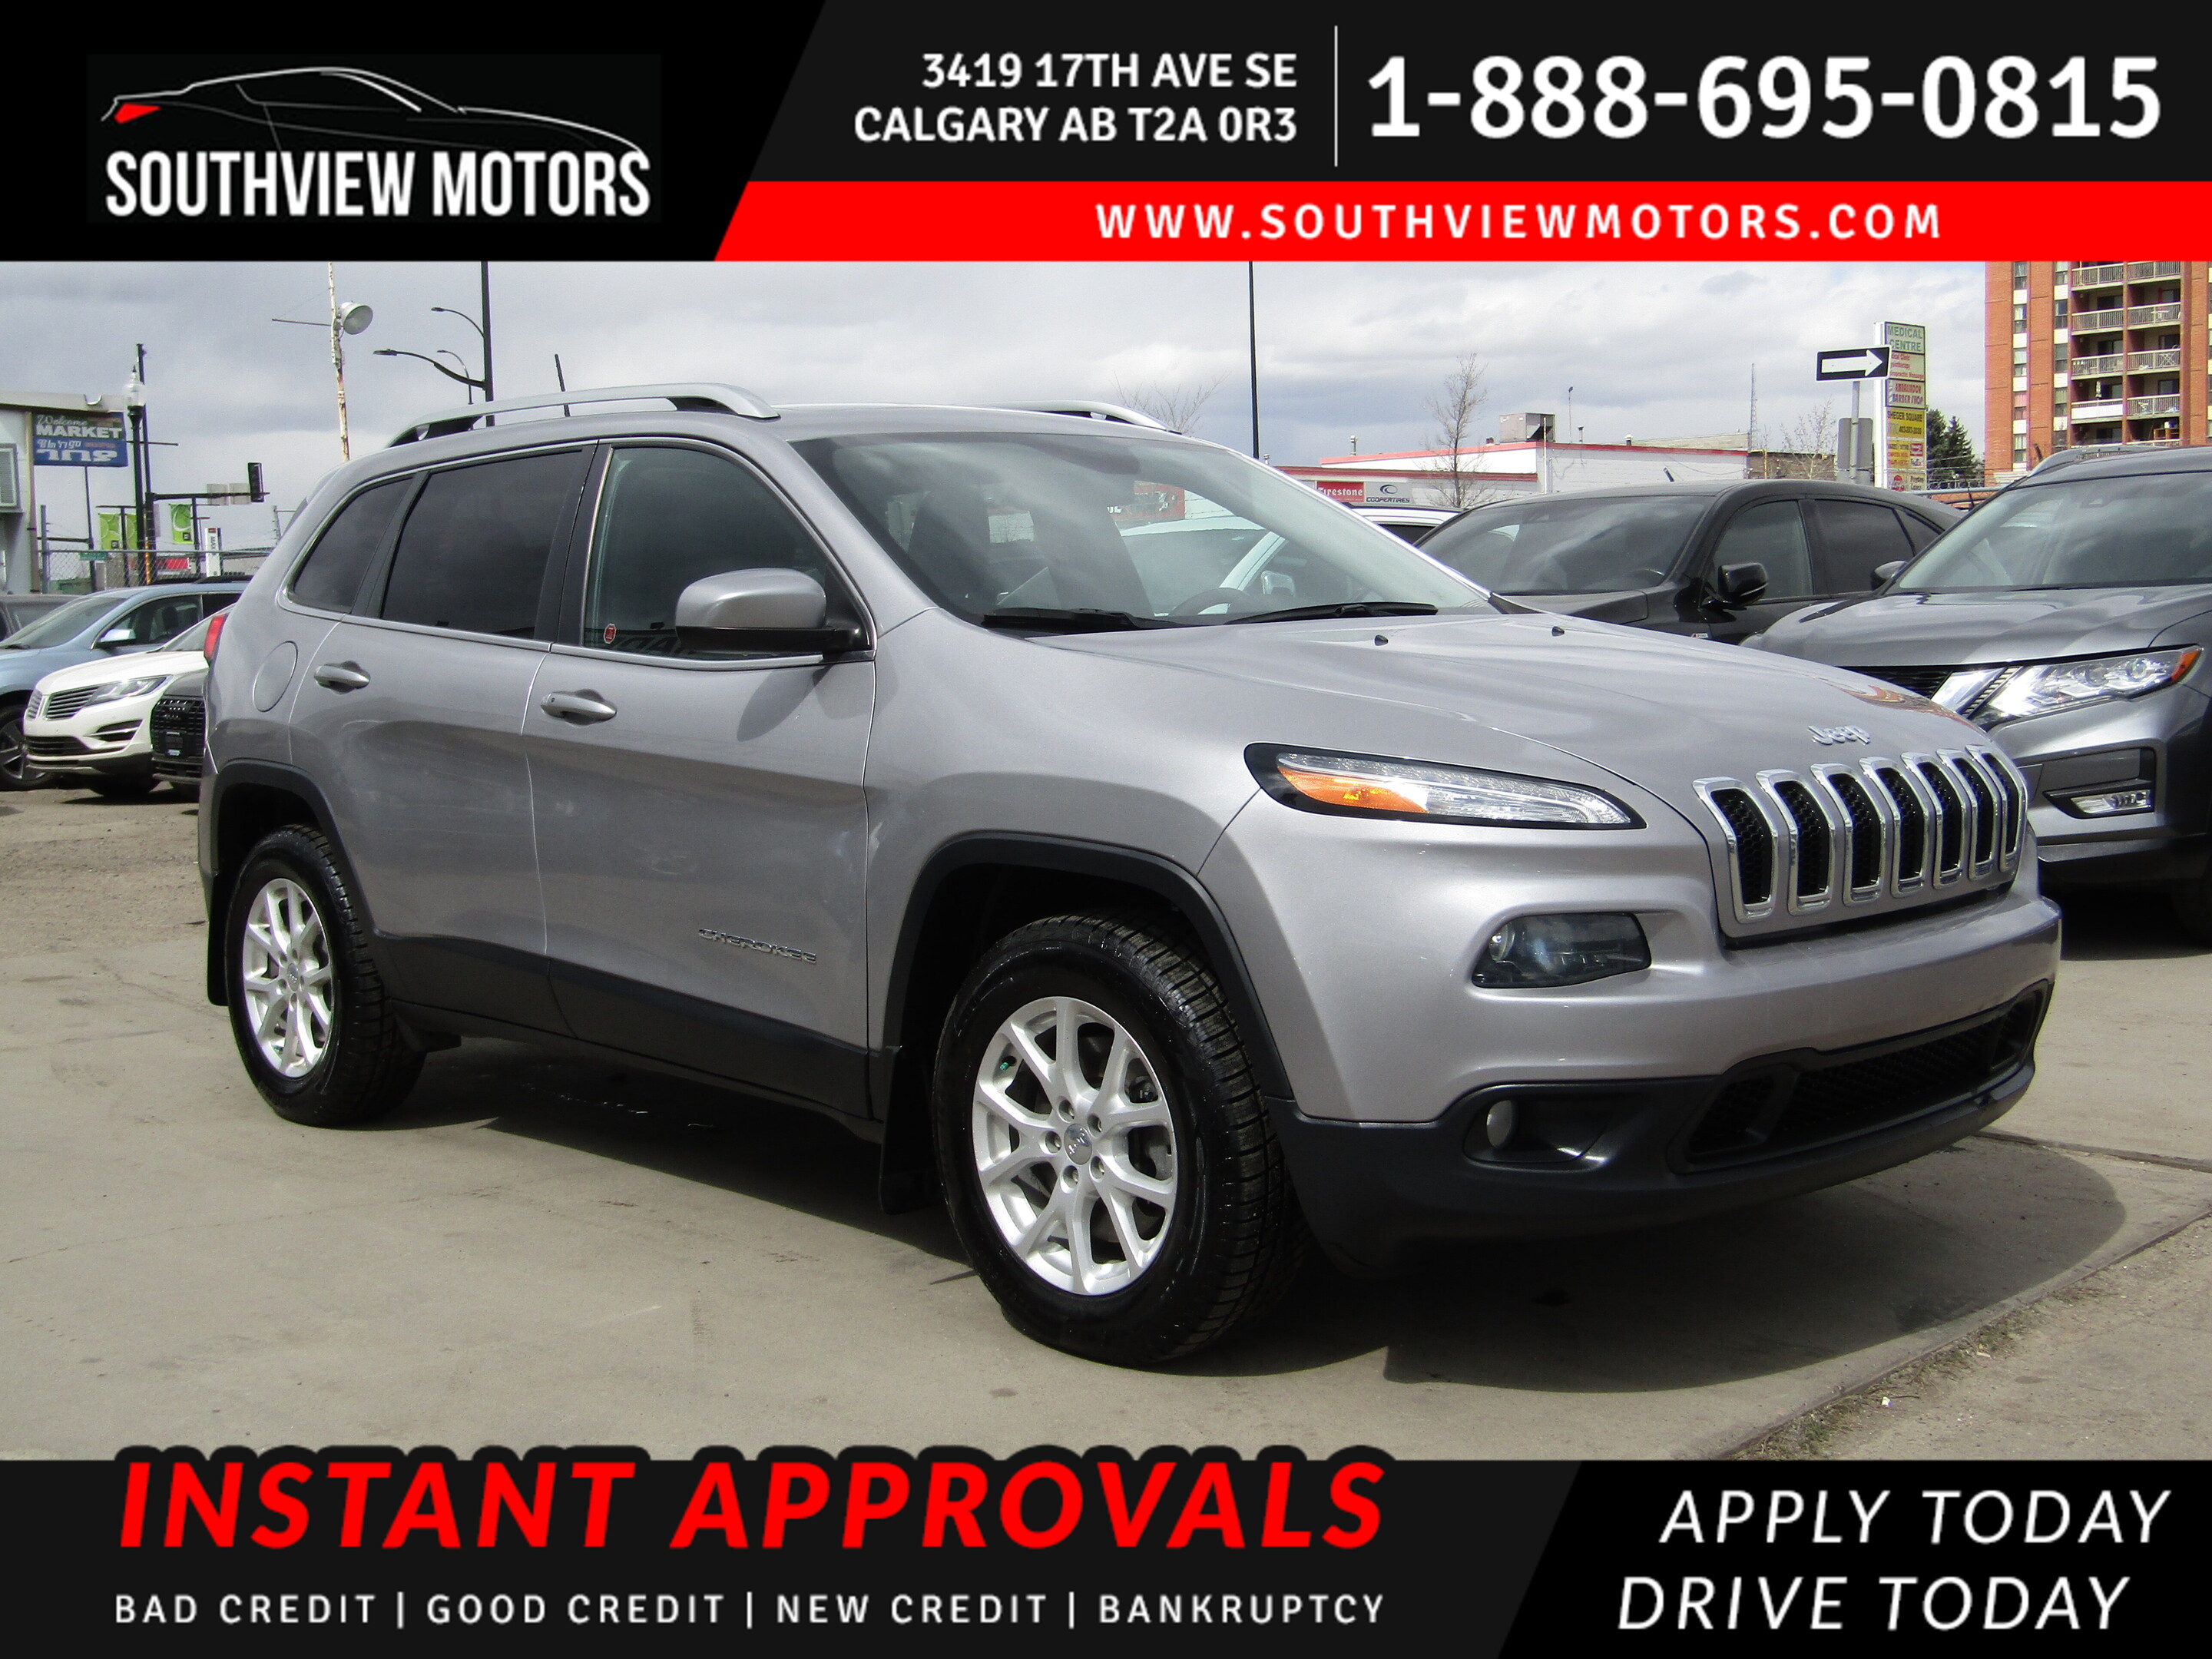 2018 Jeep Cherokee LEATHER/NORTH 4X4/V6/B.CAMERA/PANOROOF/NEW TIRES